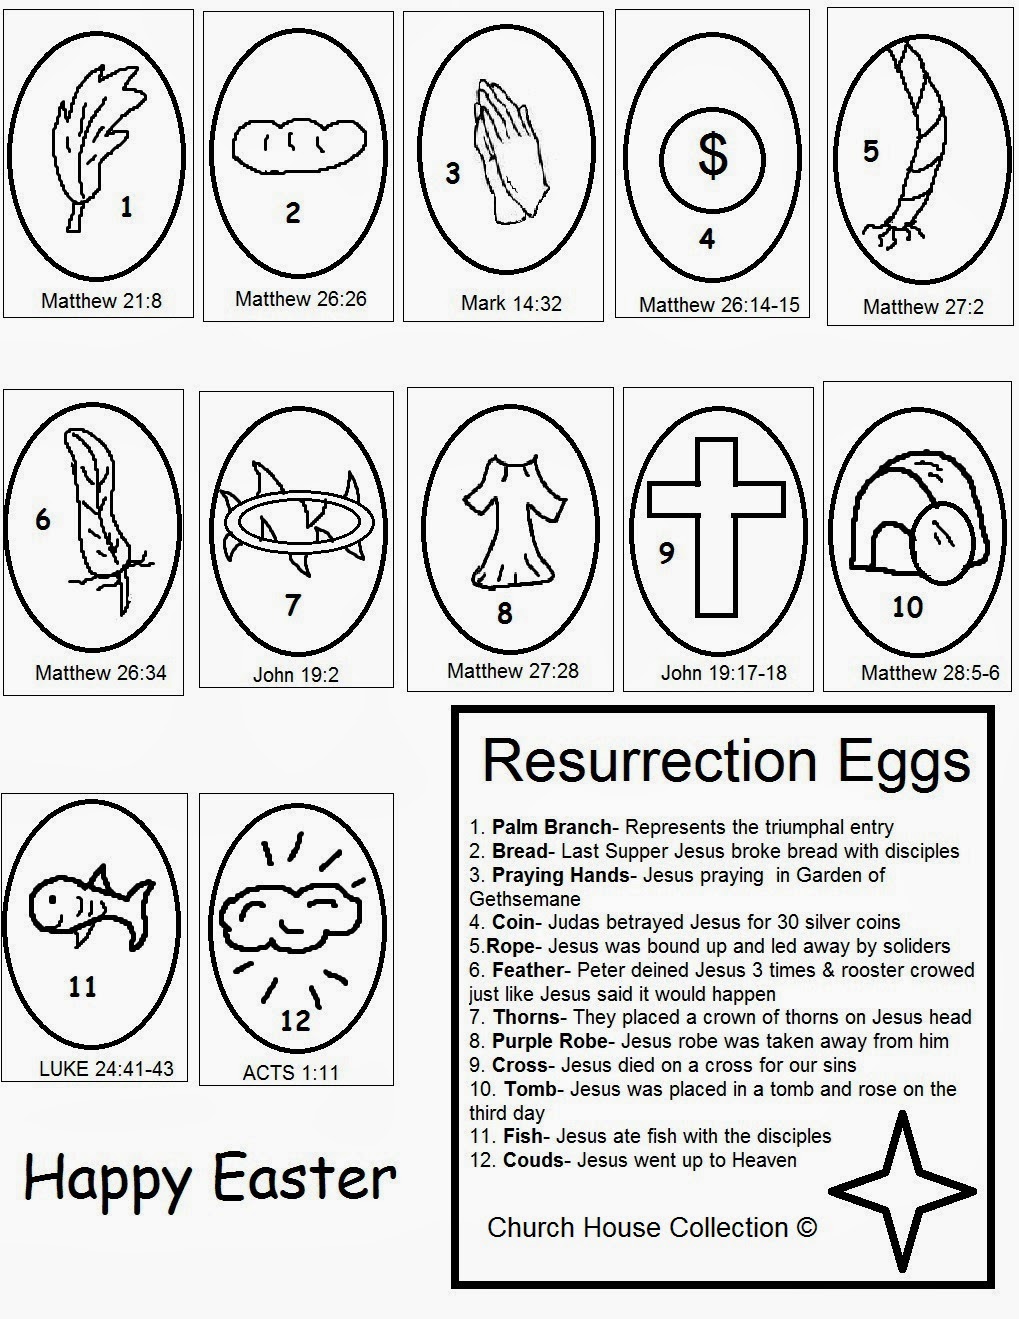 Church House Collection Blog: Easter Resurrection Eggs Craft- Free